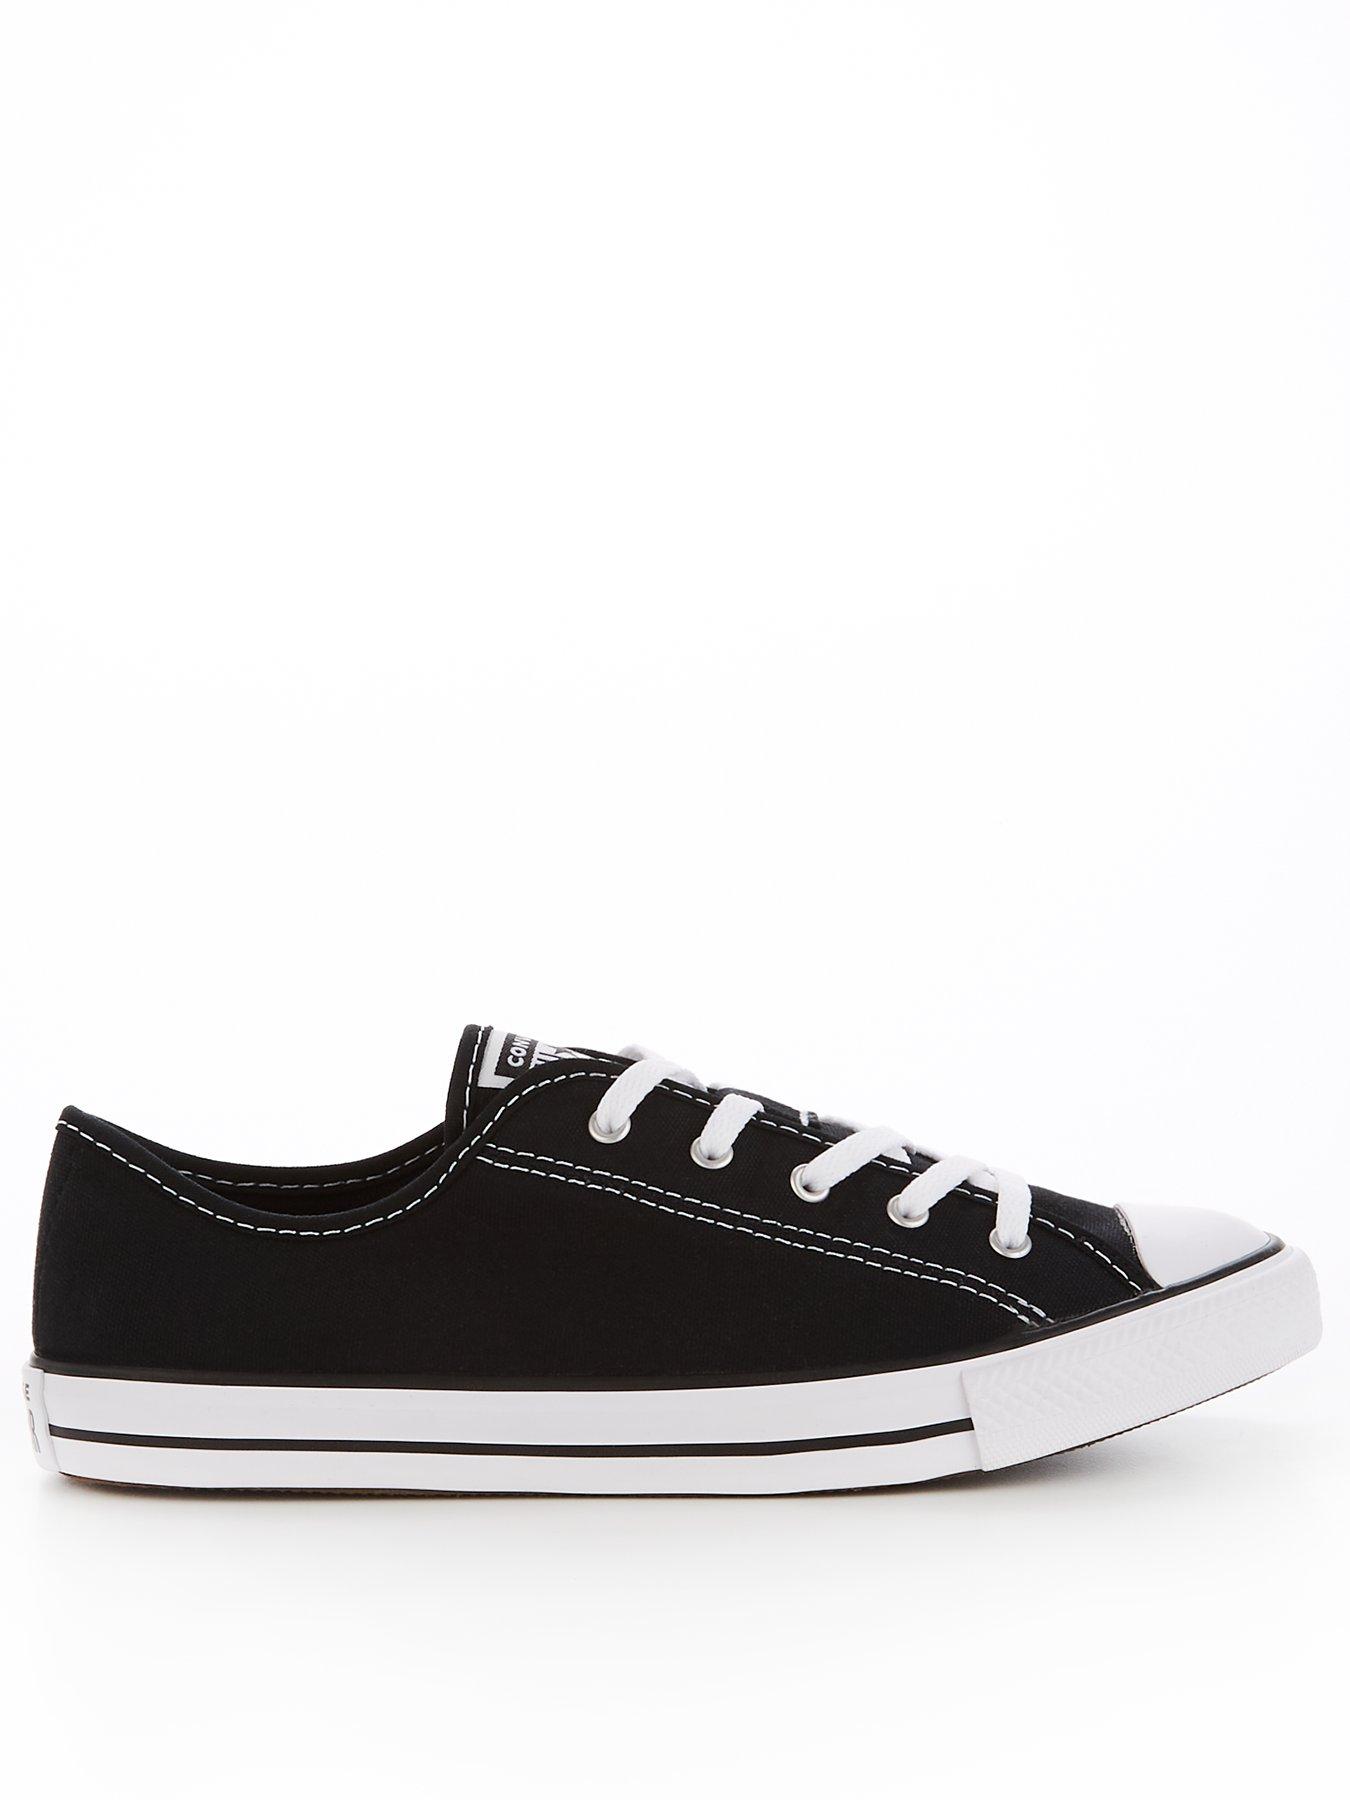 converse dainty perforated,New daily 